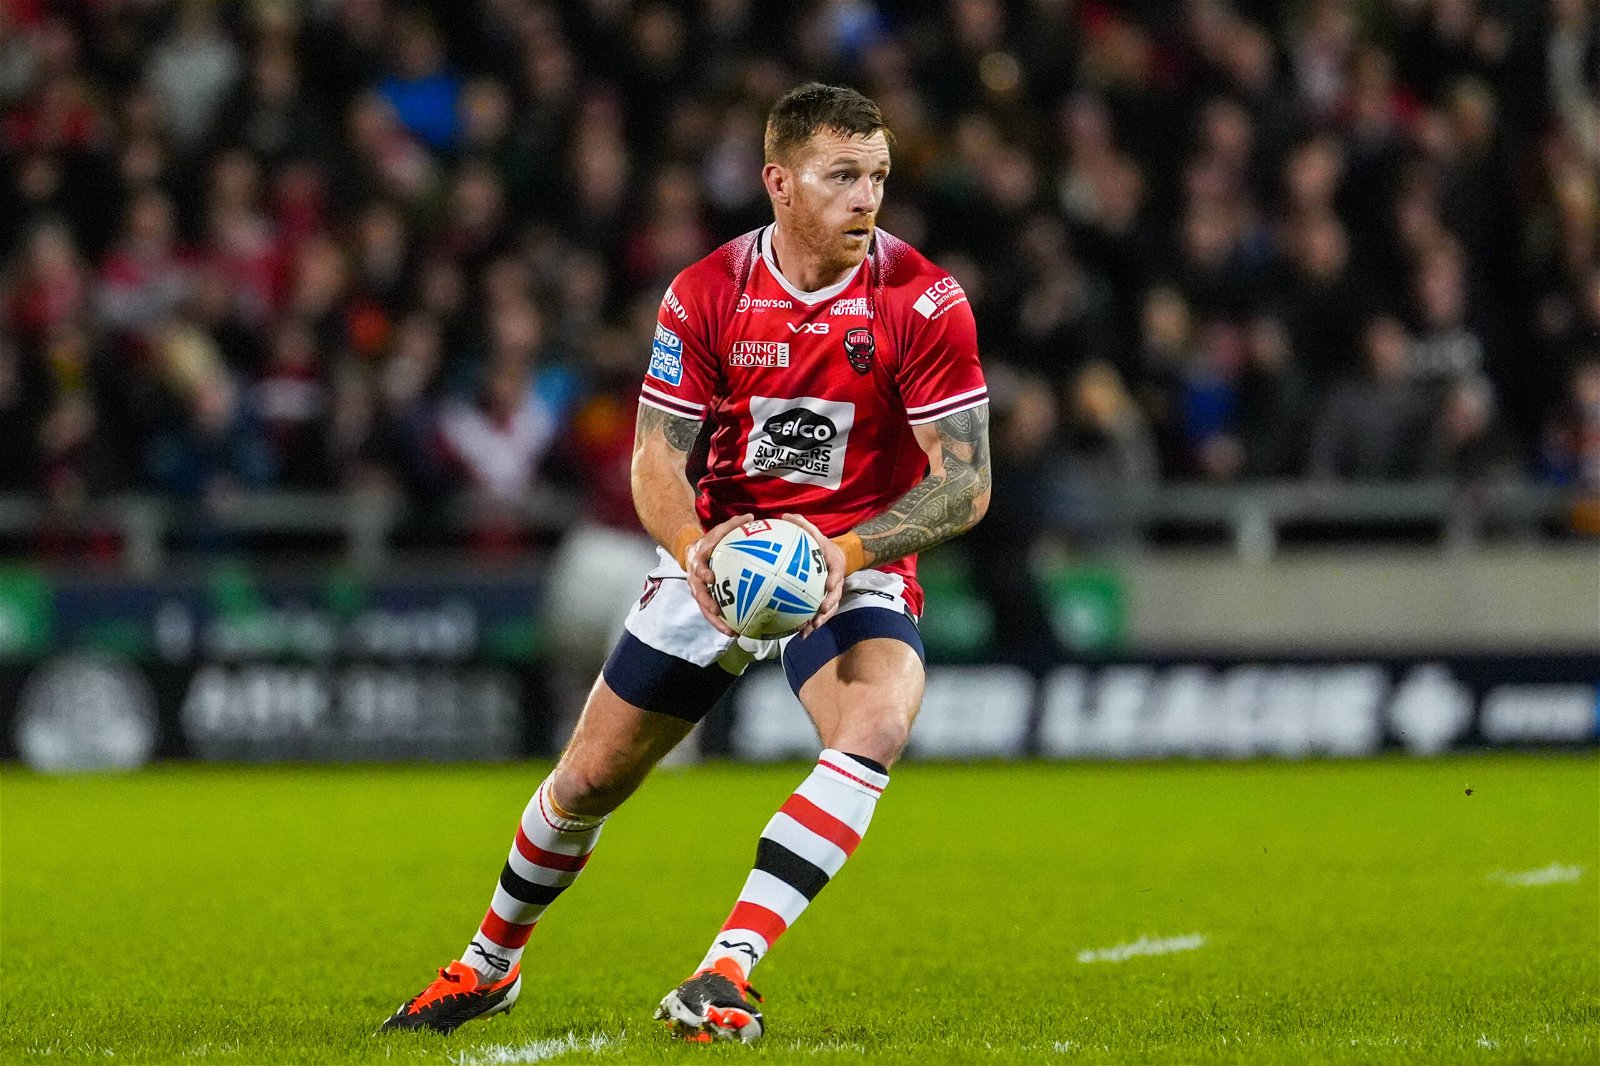 Marc Sneyd, playing for Salford, holds the ball.